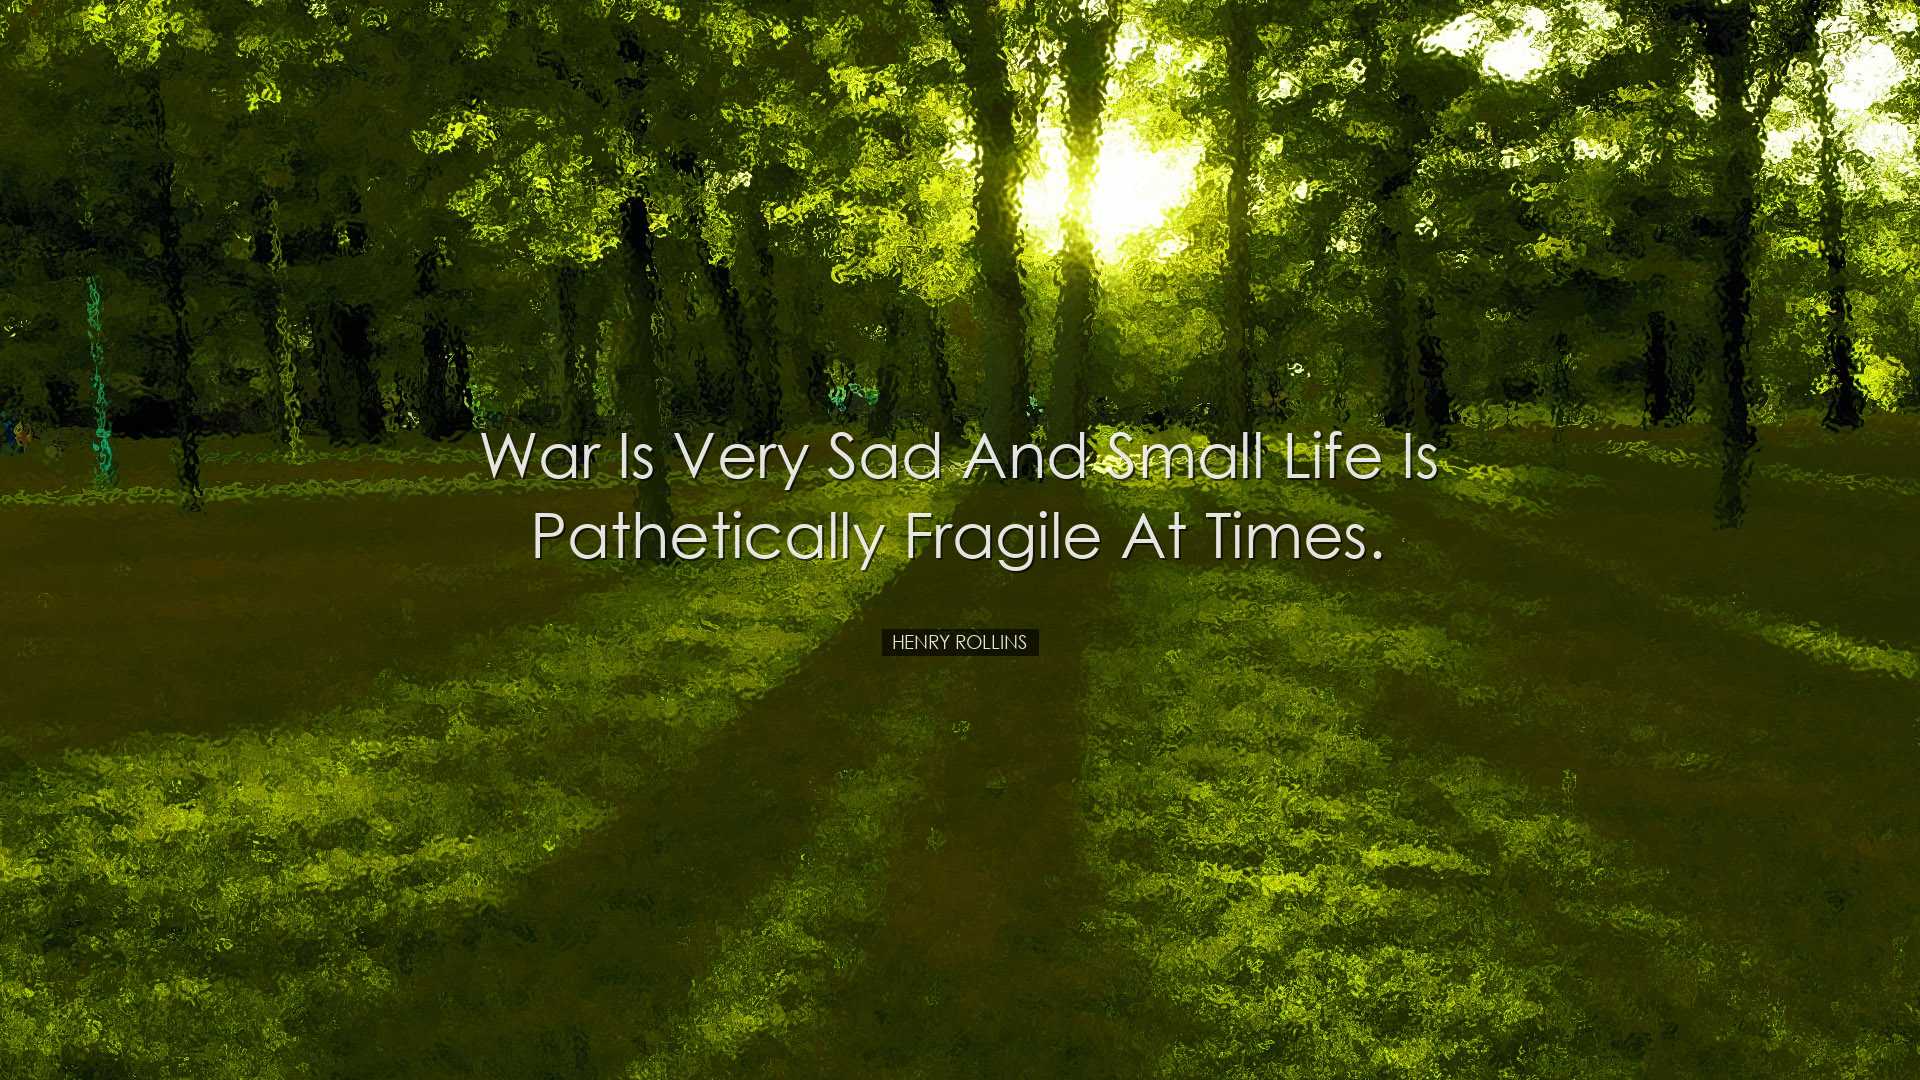 War is very sad and small life is pathetically fragile at times. -